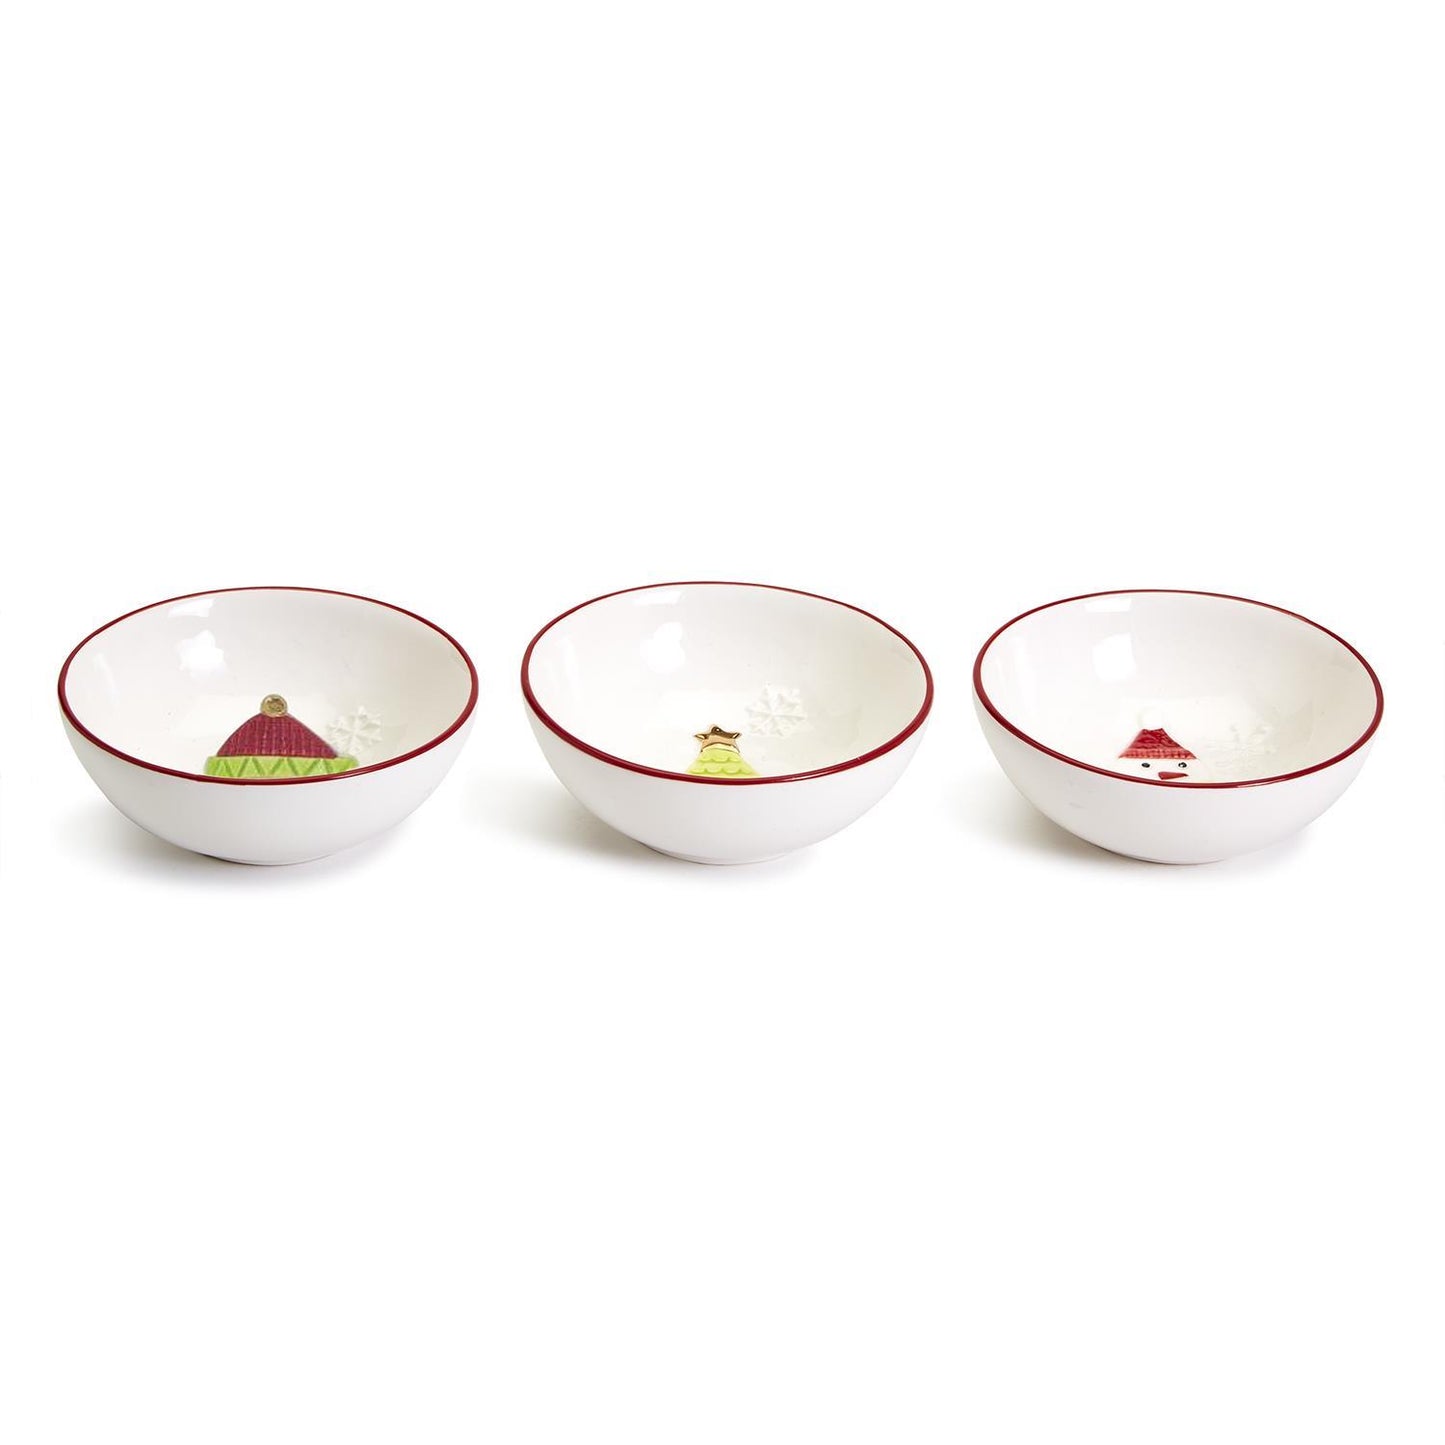 Two's Company Merry And Bright Set Of 3 Christmas Tidbit Bowls Includes 3 Design